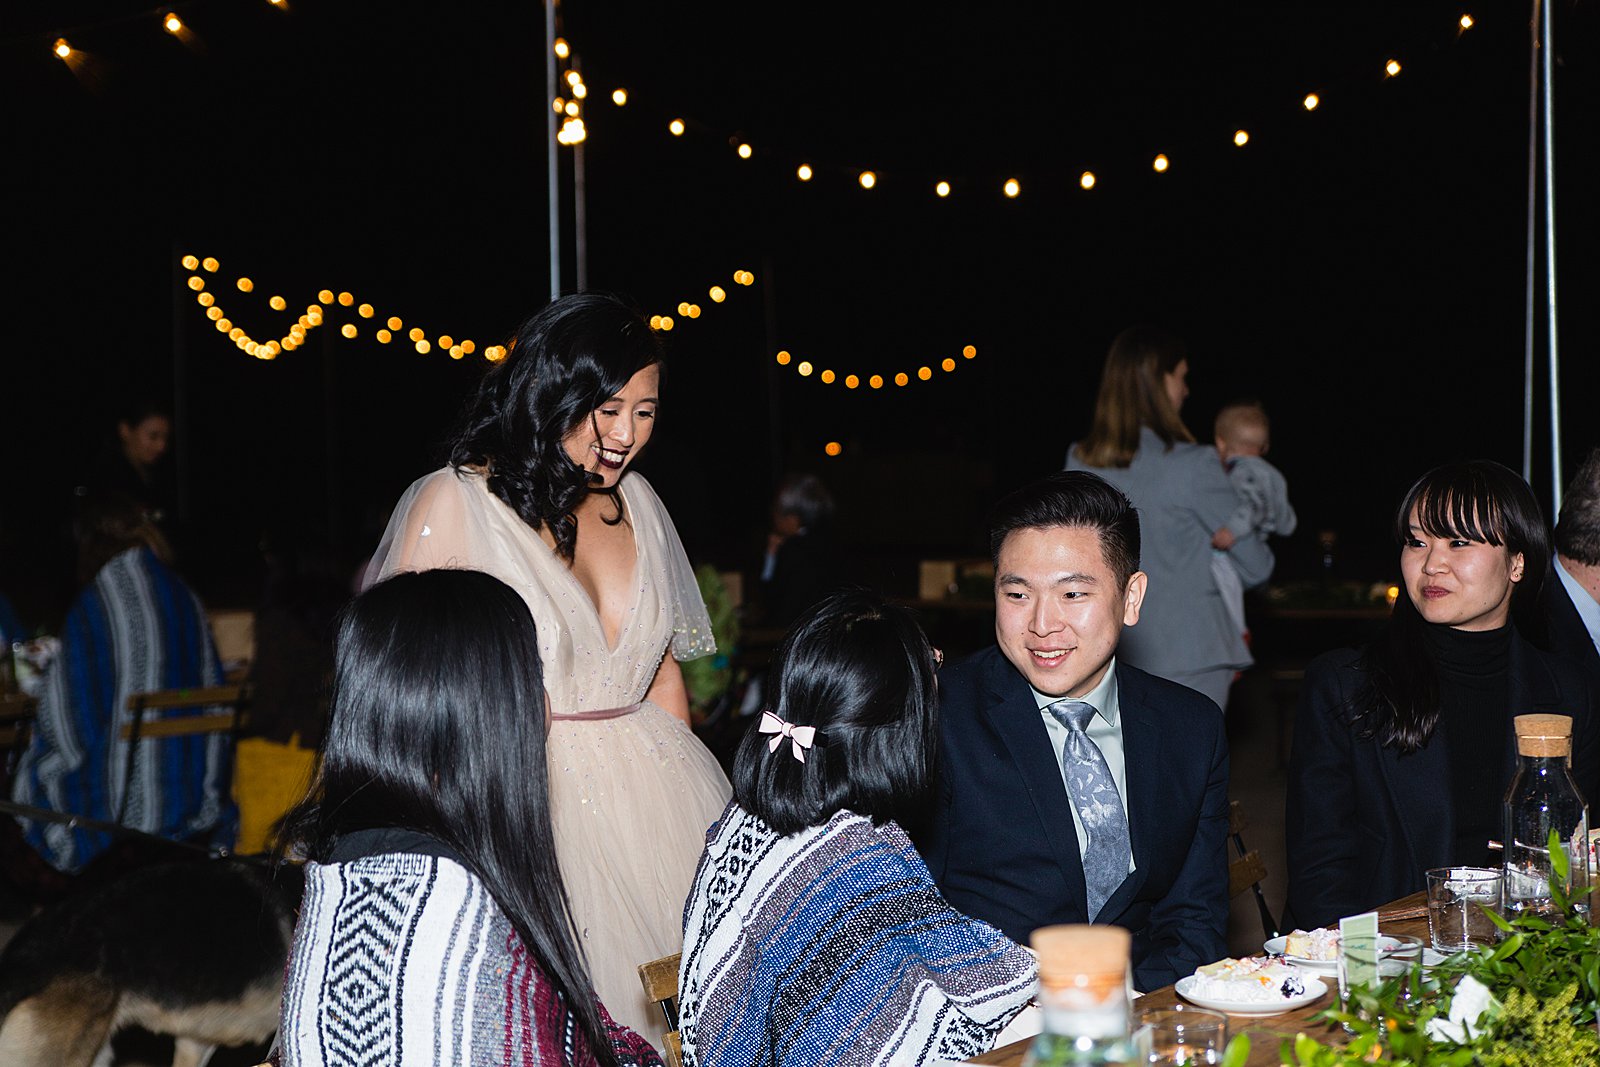 Bride mingling with guests at a Cloth and Flame wedding reception by Phoenix wedding photographer PMA Photography.